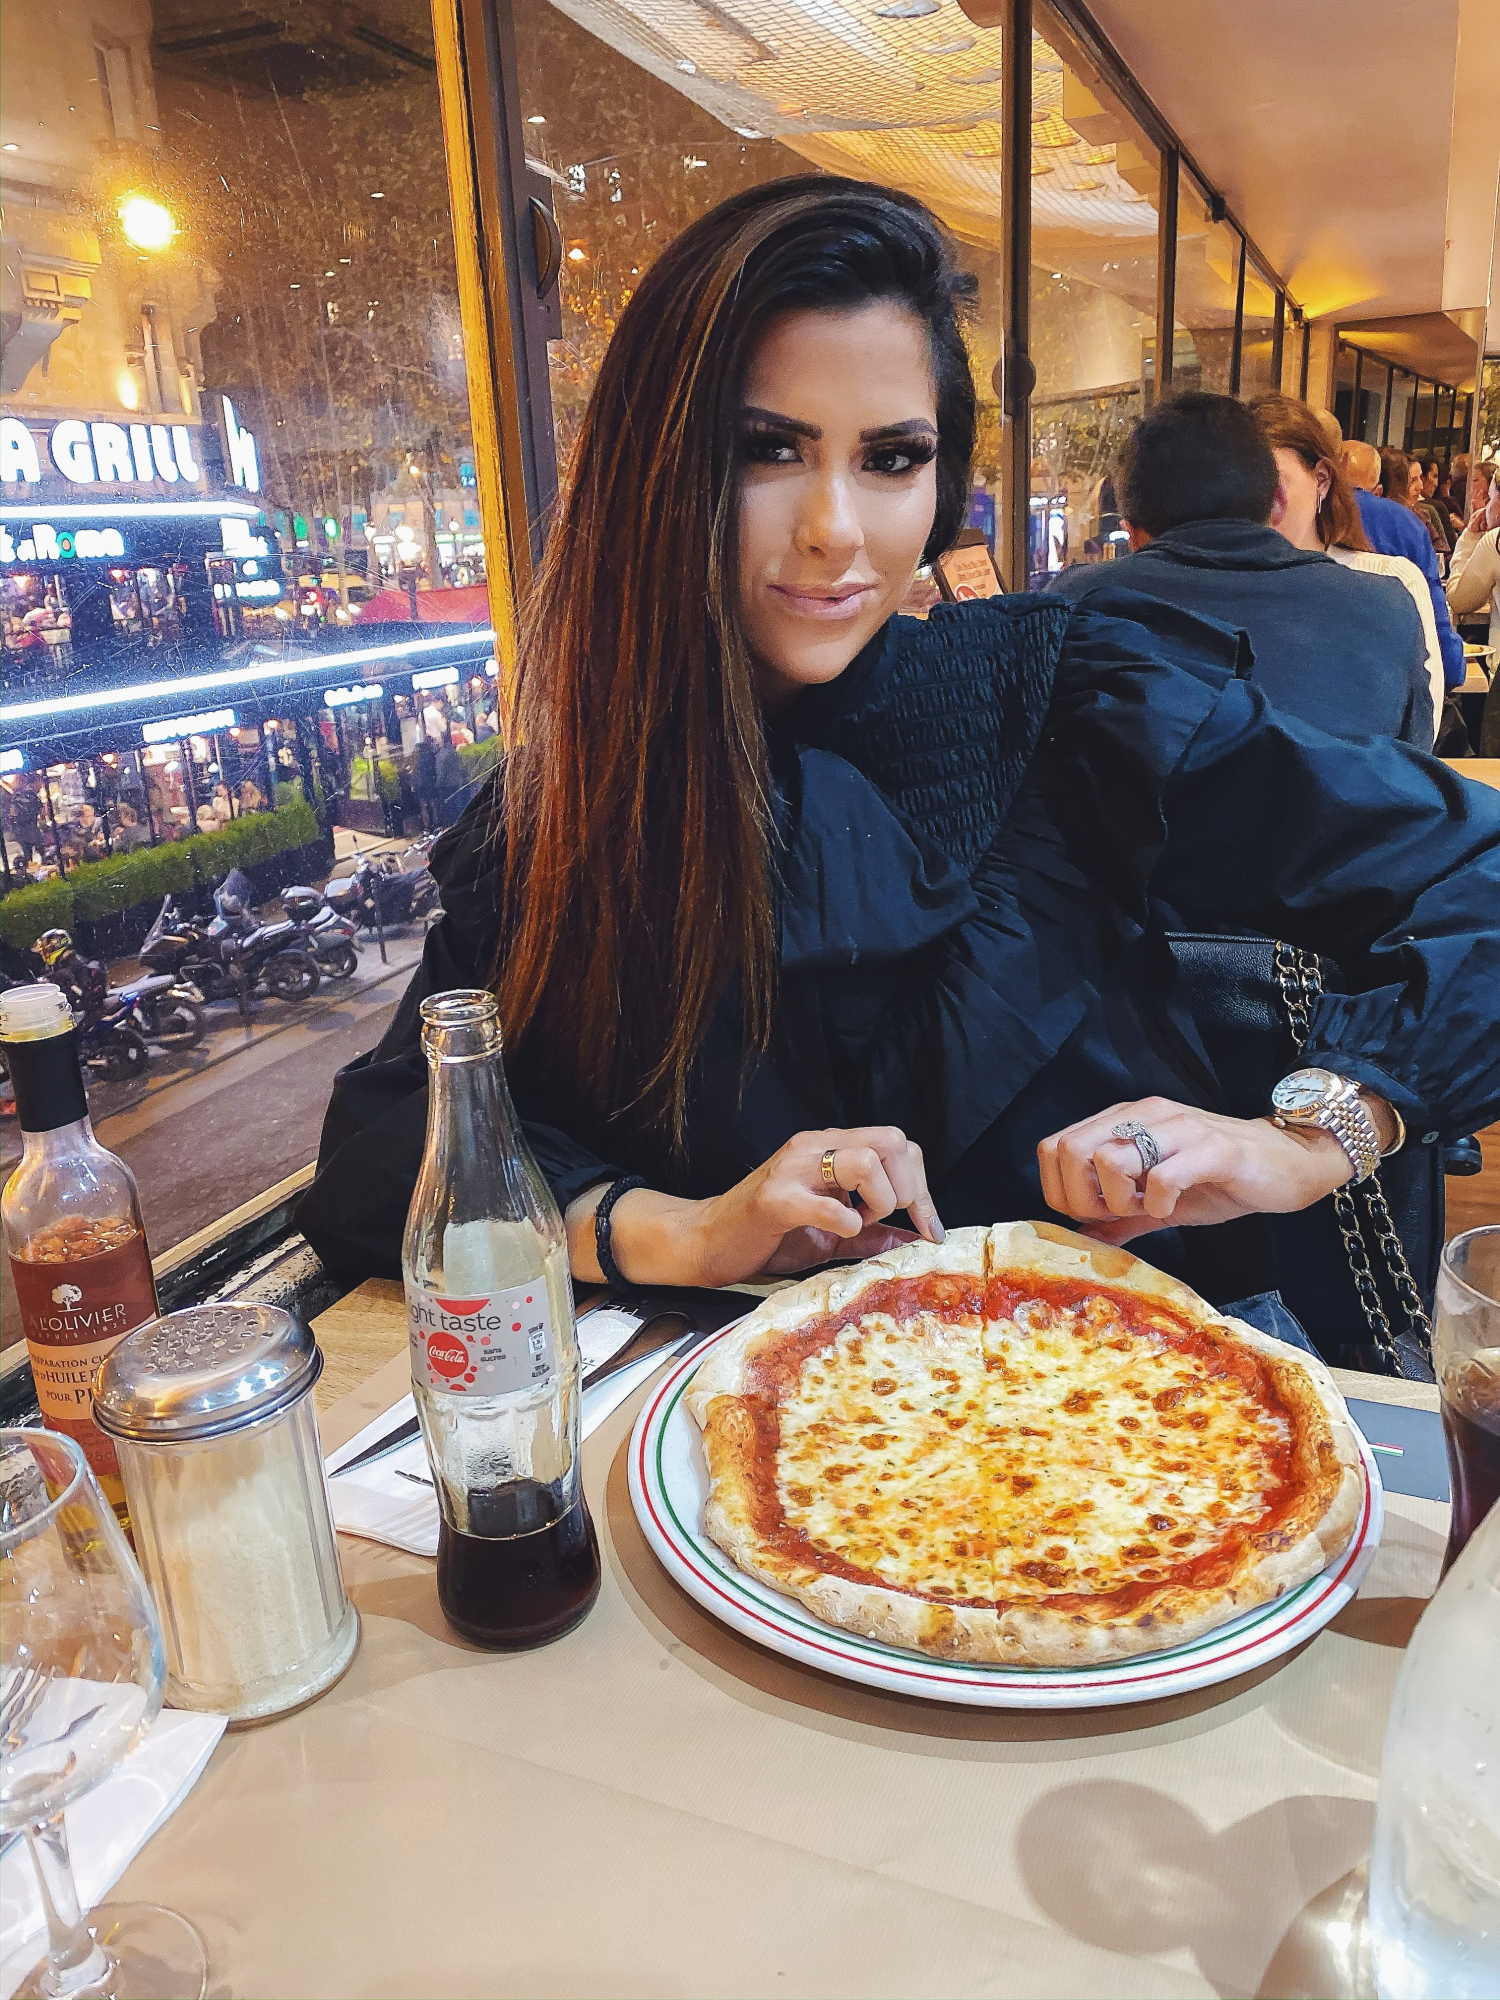 paris fashion outfit idea emily gemma | A YEAR IN REVIEW : MASSIVE 2019 INSTAGRAM RECAP by popular Oklahoma life and style blog, The Sweetest Thing: image of a woman eating pizza and wearing a black Zara top. 